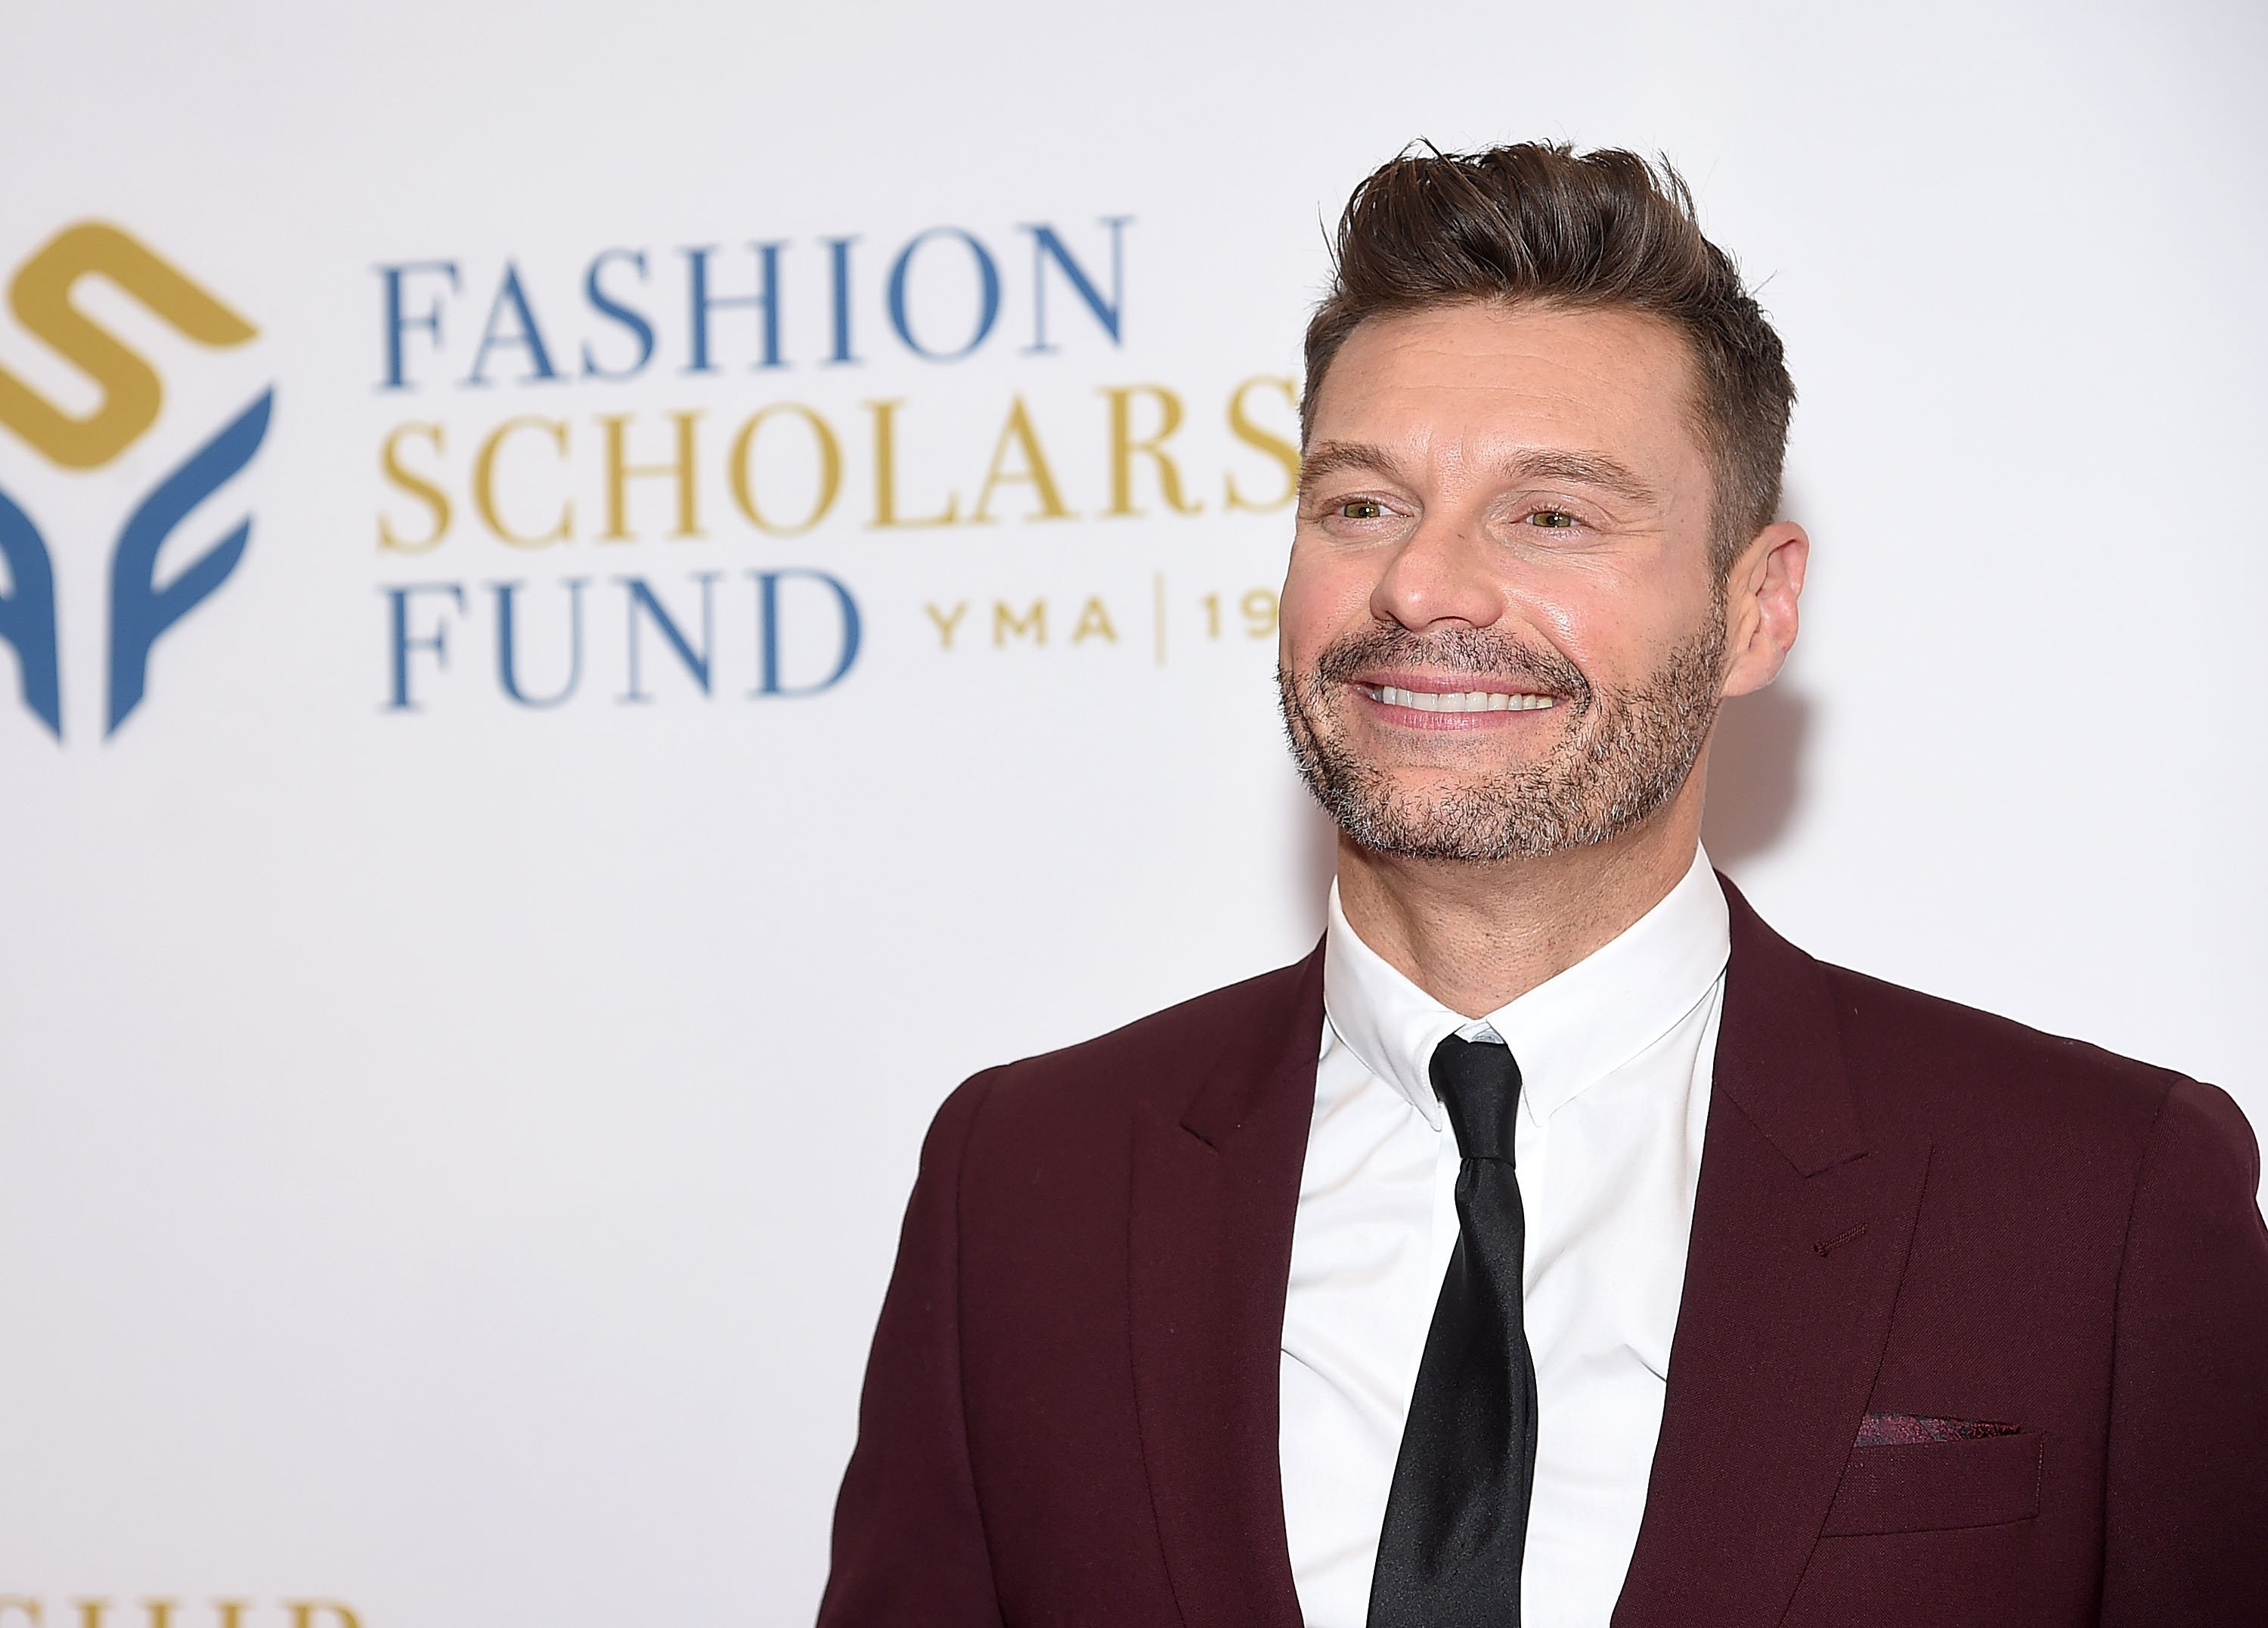 Ryan Seacrest at the 2019 Fashion Scholarship Fund Awards Gala on January 10 in New York City | Photo: Getty Images 